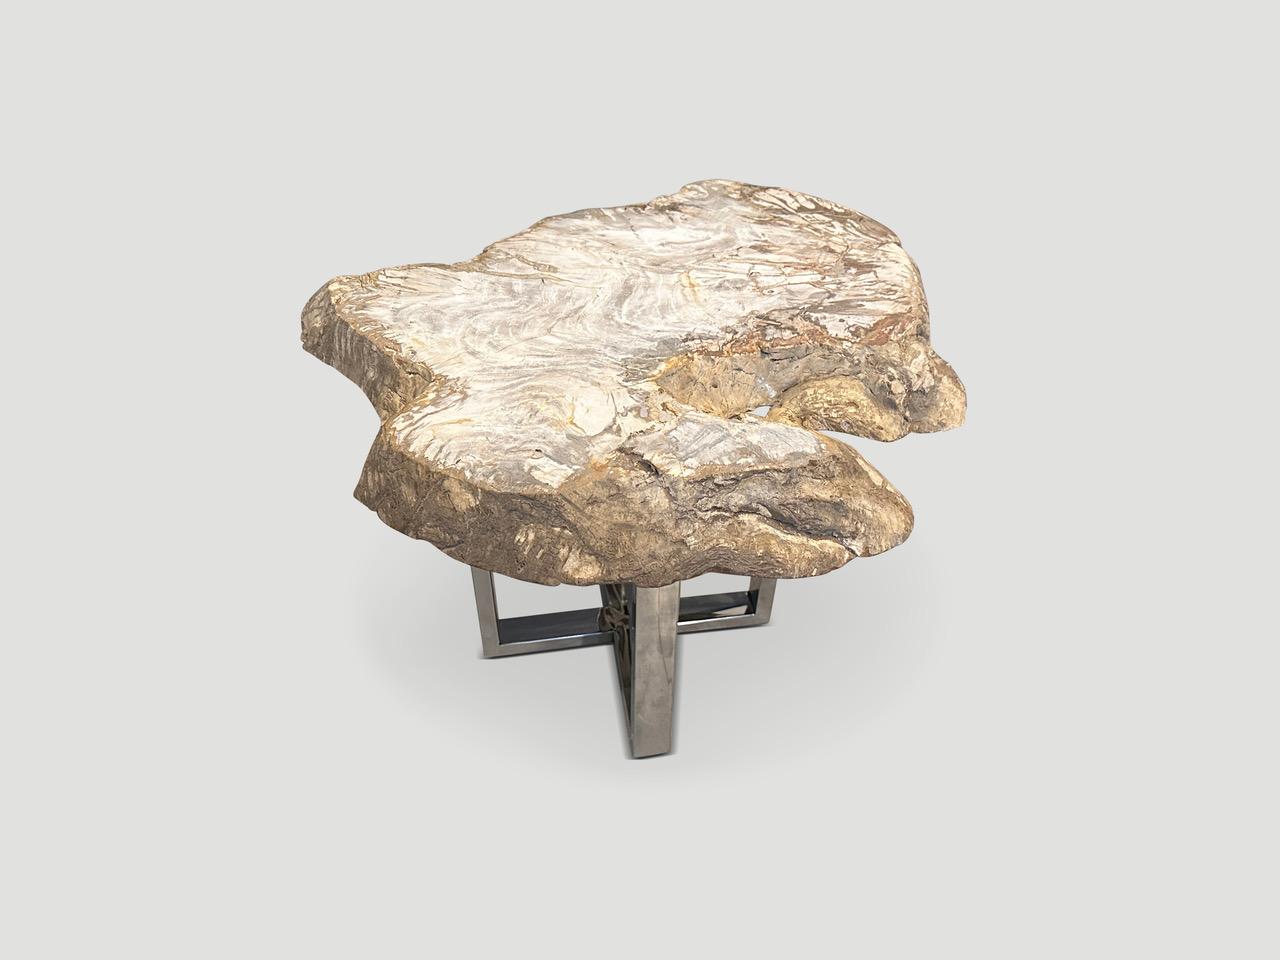 Beautiful neutral tones in this high quality petrified wood two inch slab side table. Shown with a choice of a minimalist stainless steel base or a black metal coated base. It’s fascinating how Mother Nature produces these exquisite 40 million year